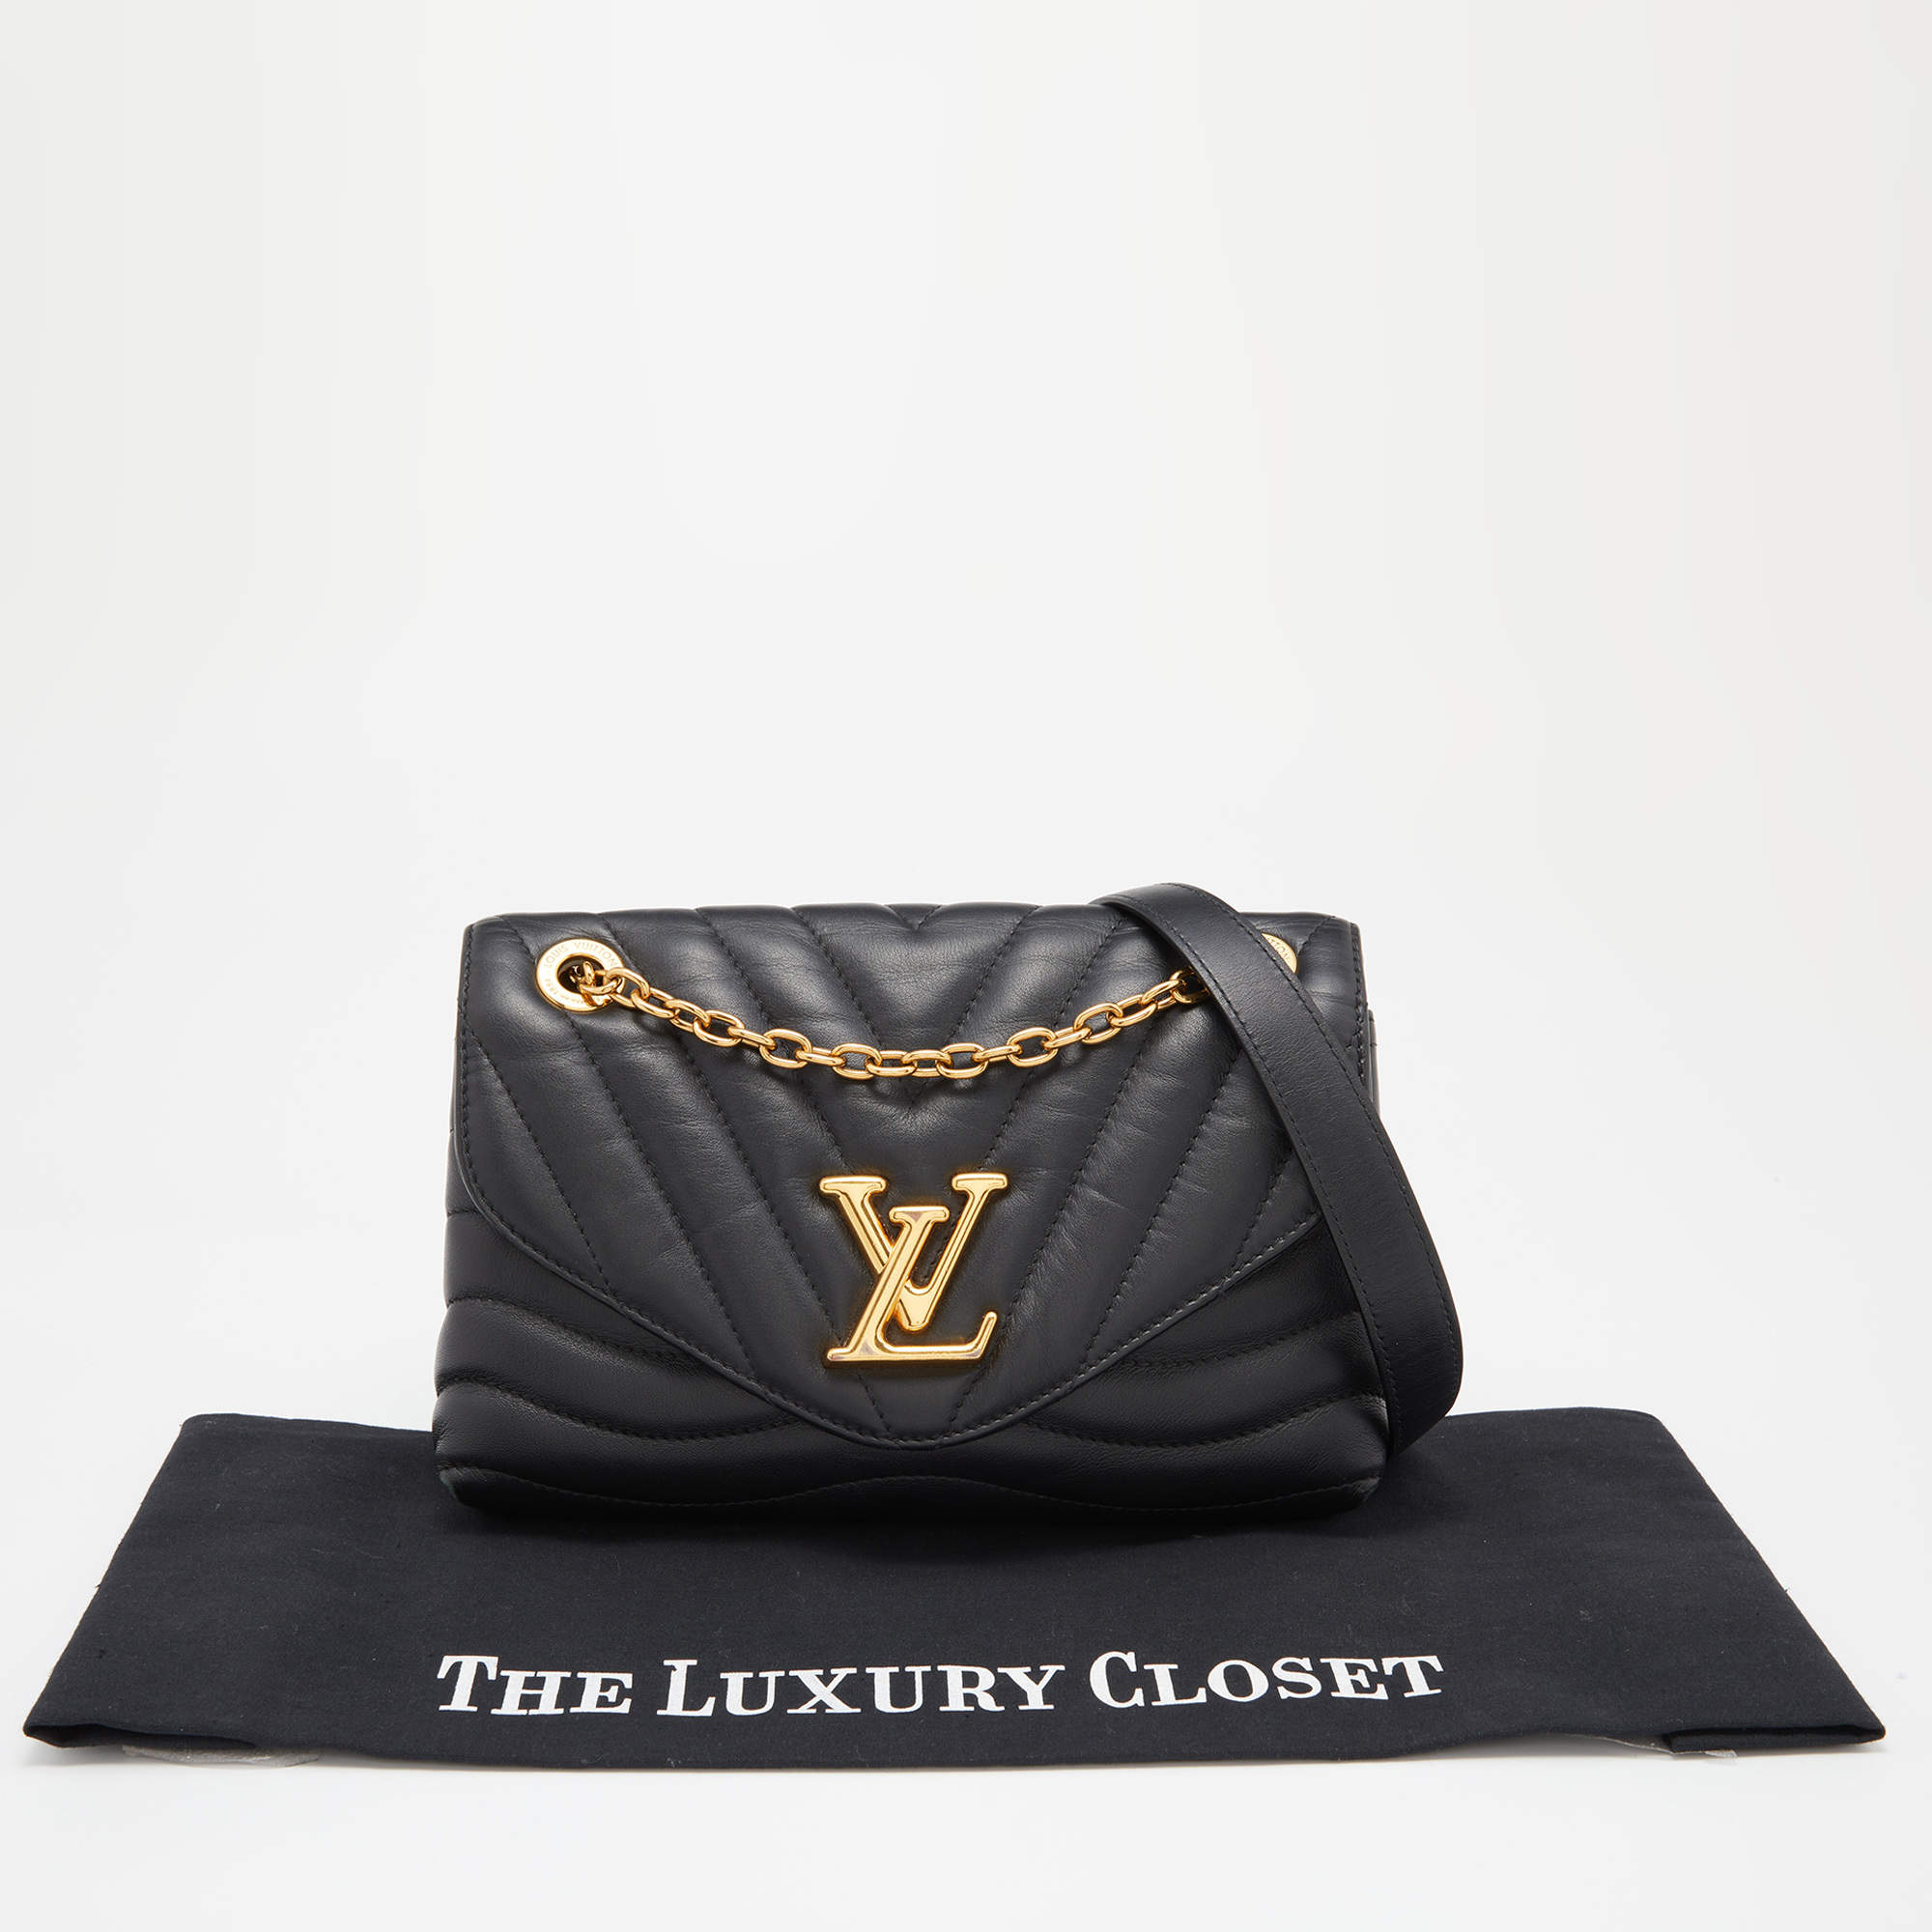 Louis Vuitton New Wave Chain Bag Quilted Leather MM Black 2273211